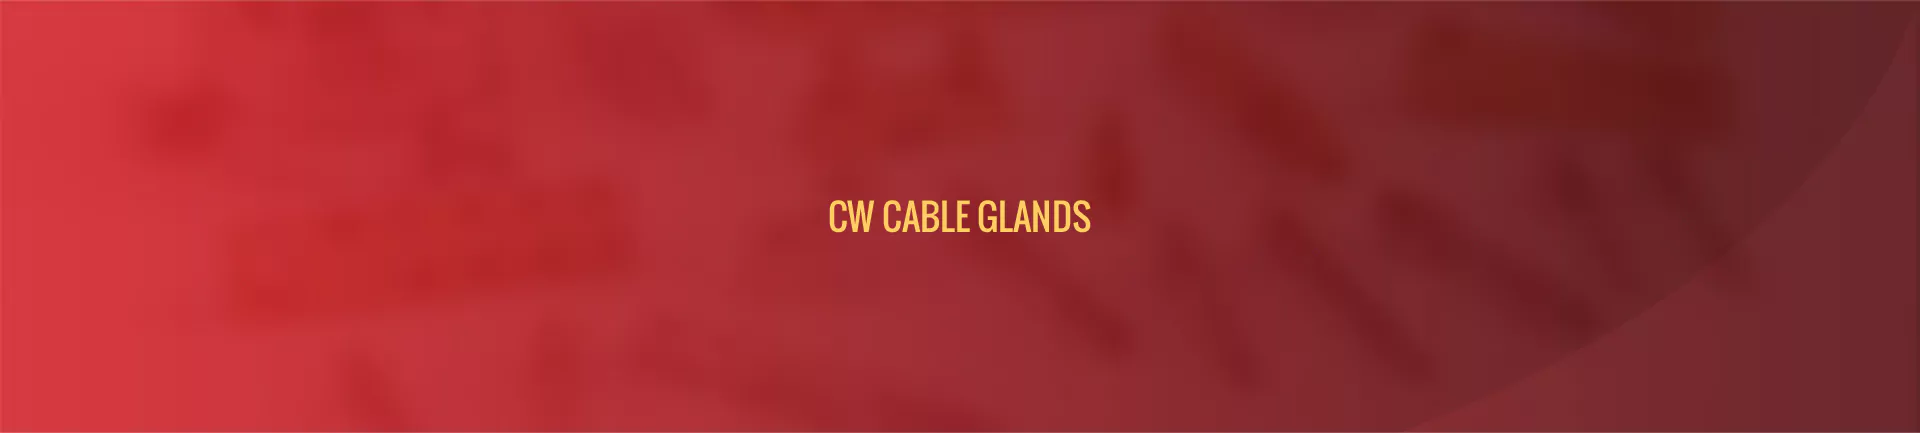 cw-cable-glands-banner